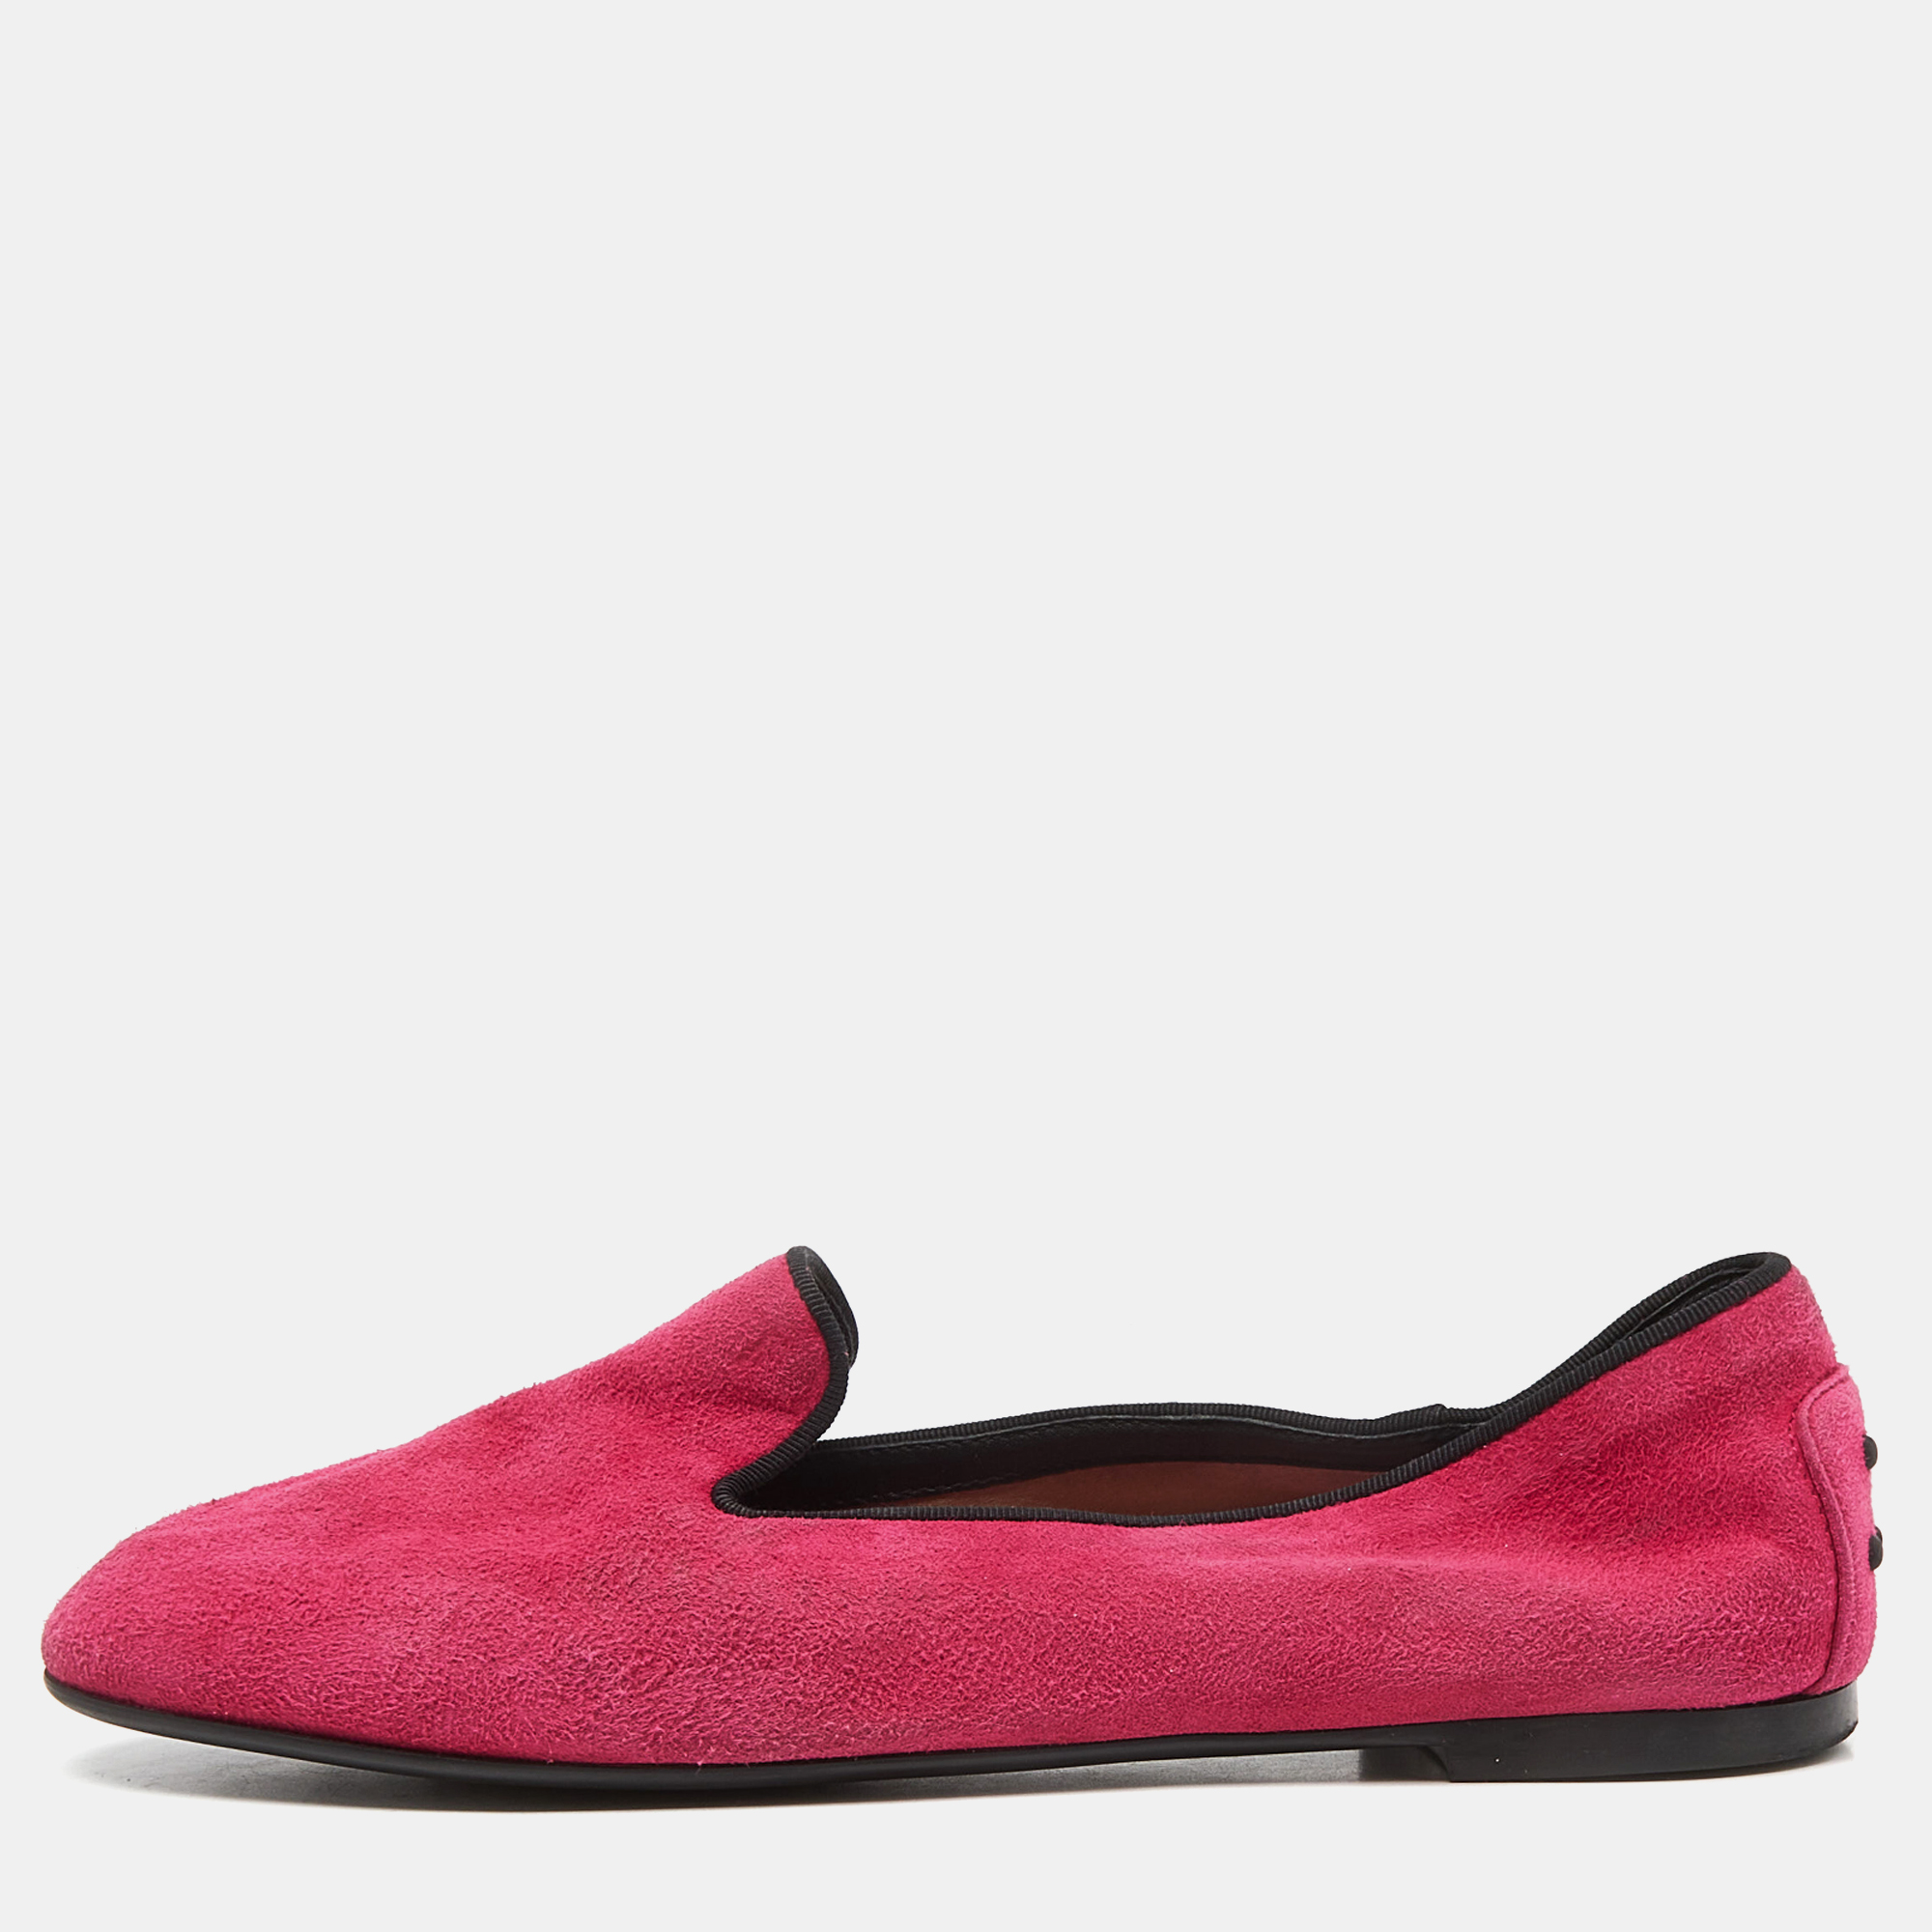 Pre-owned Tod's Pink Suede Smoking Slippers Size 36.5